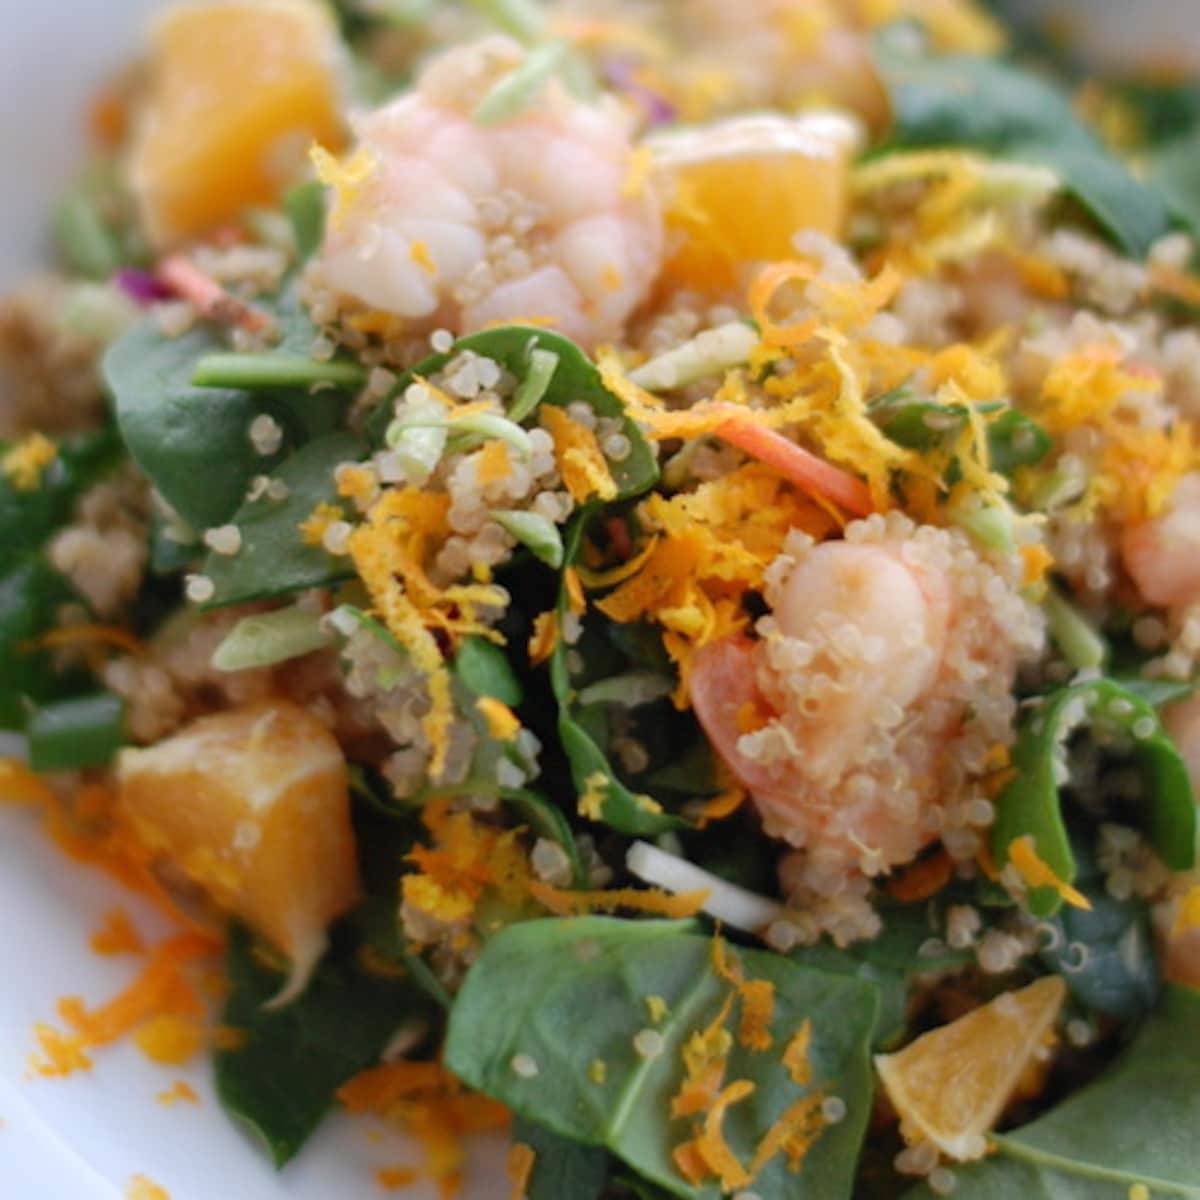 This shrimp and quinoa salad is super healthy, bright, and colorful. Fresh spinach, sauteed shrimp, quinoa, orange zest, and Asian dressing. | pinchofyum.com